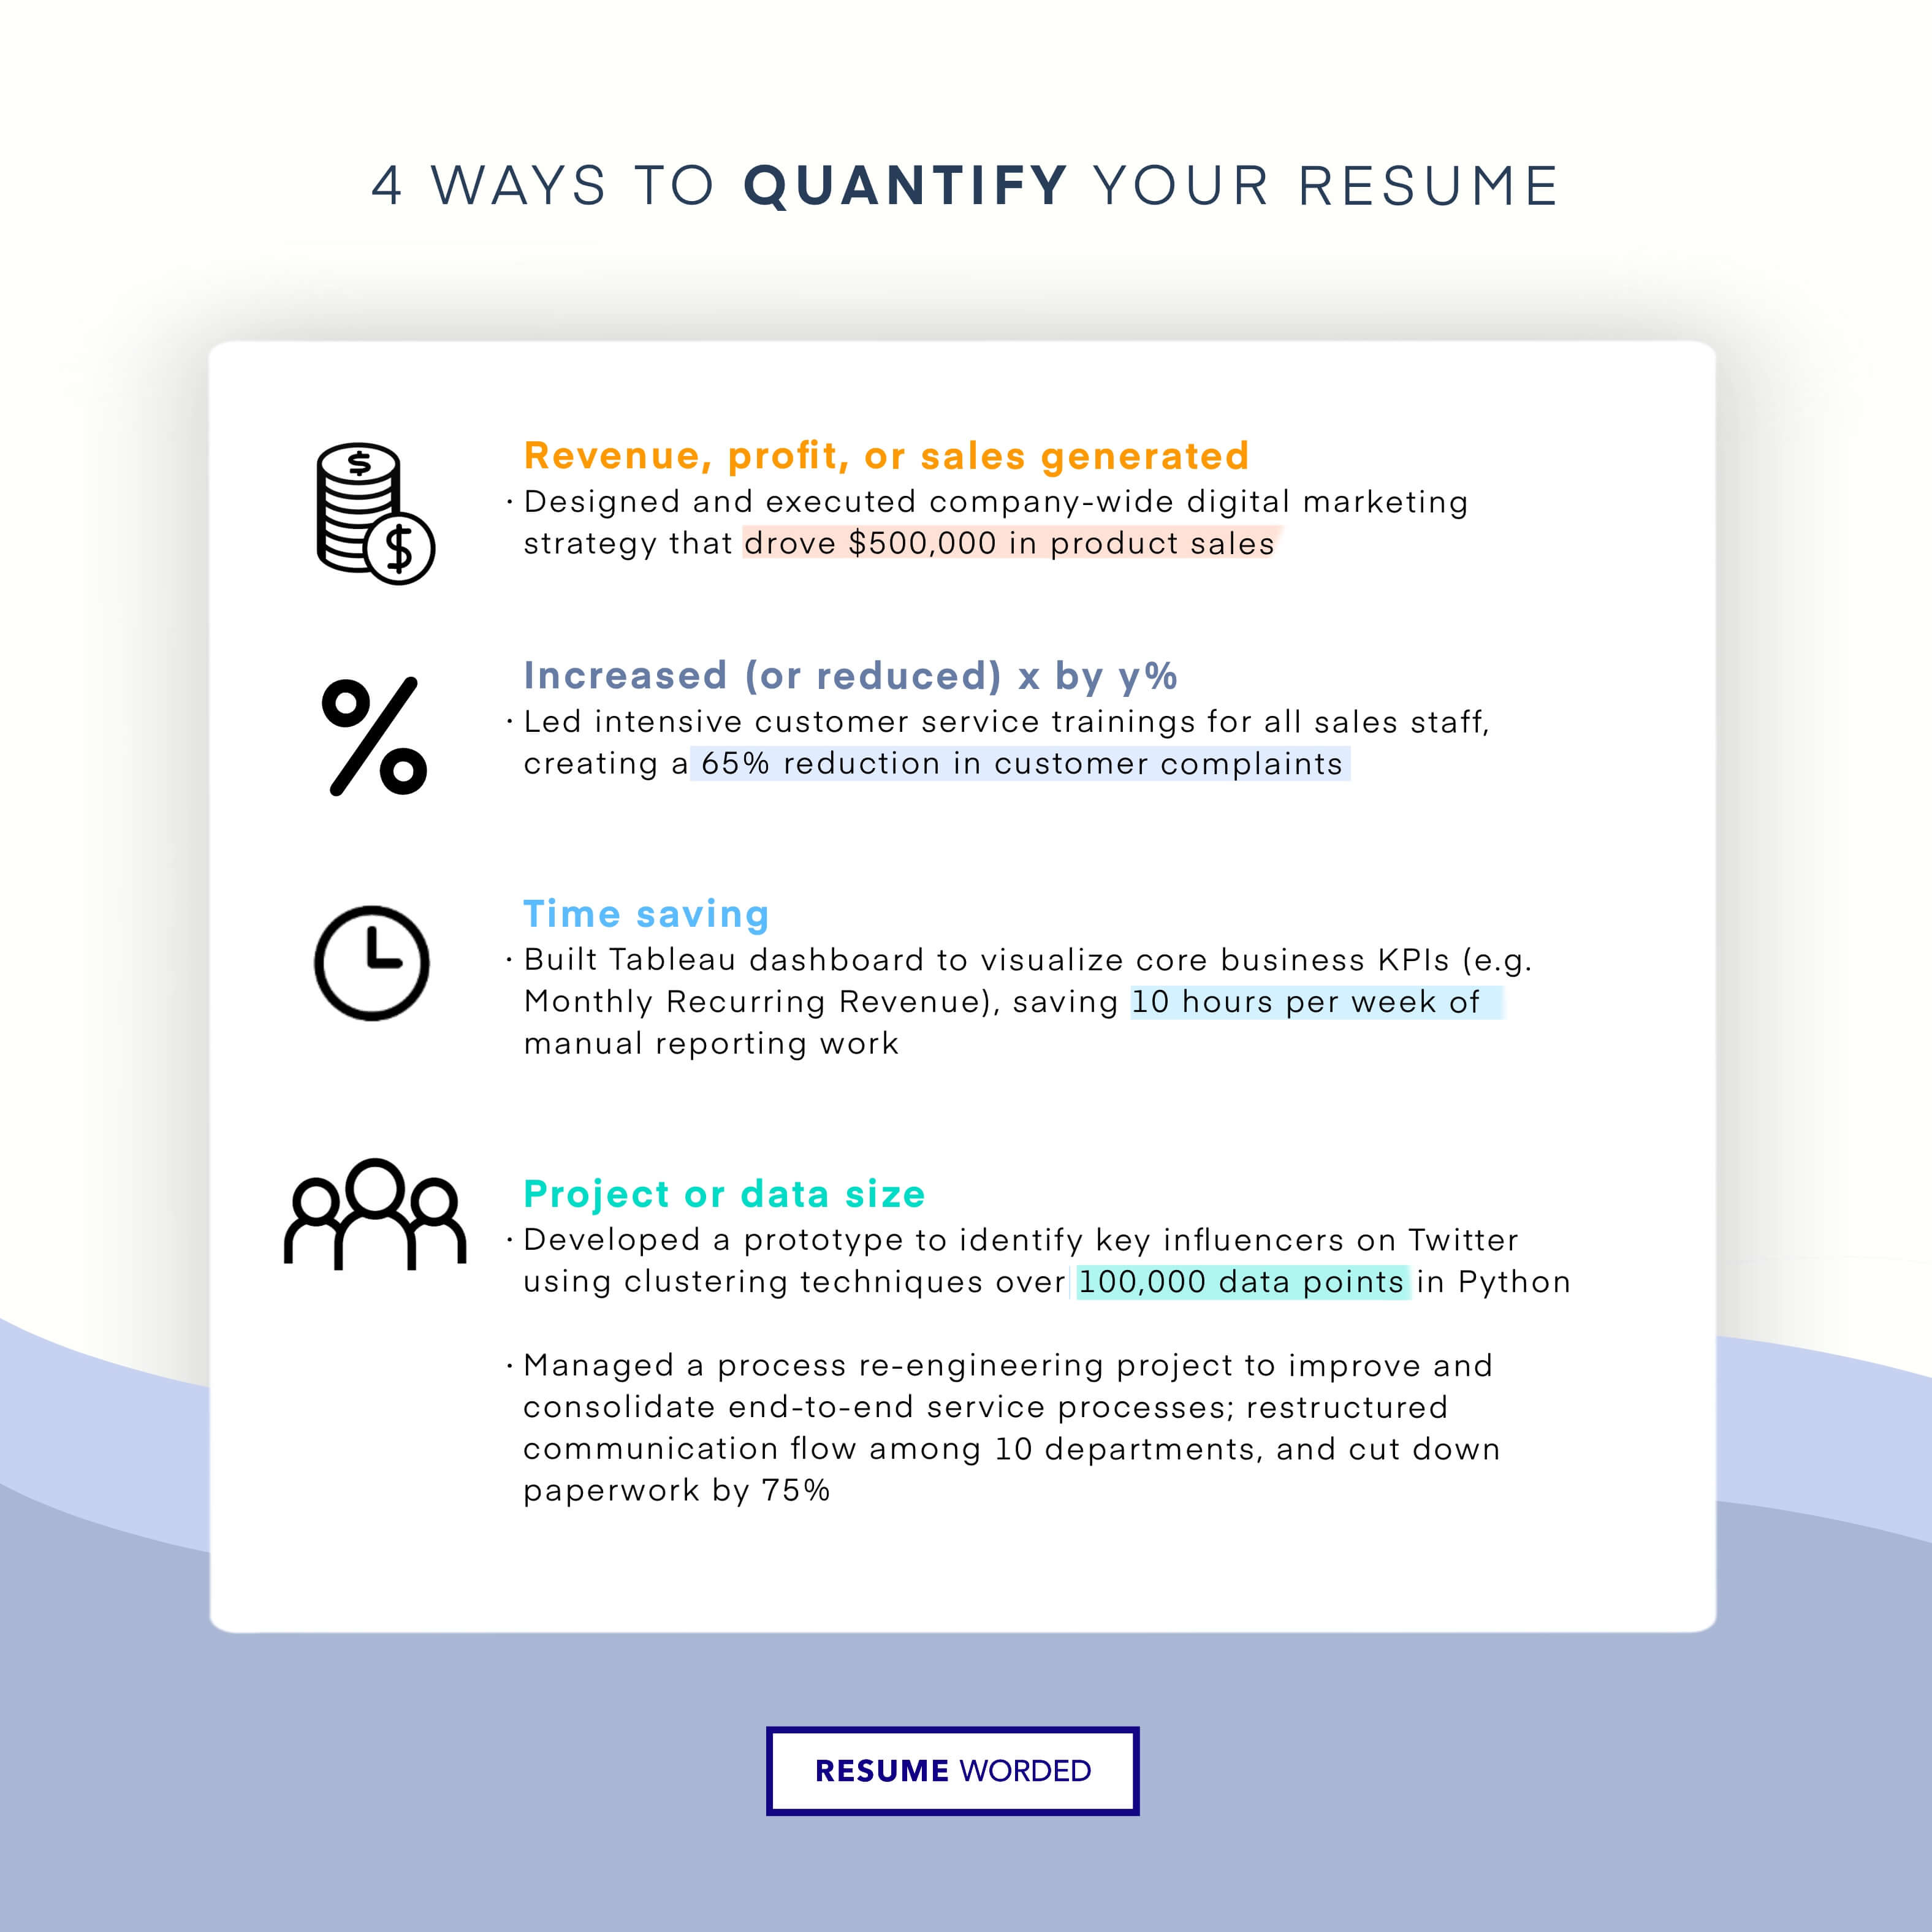 Quantify your achievements - Sales and Marketing Director CV